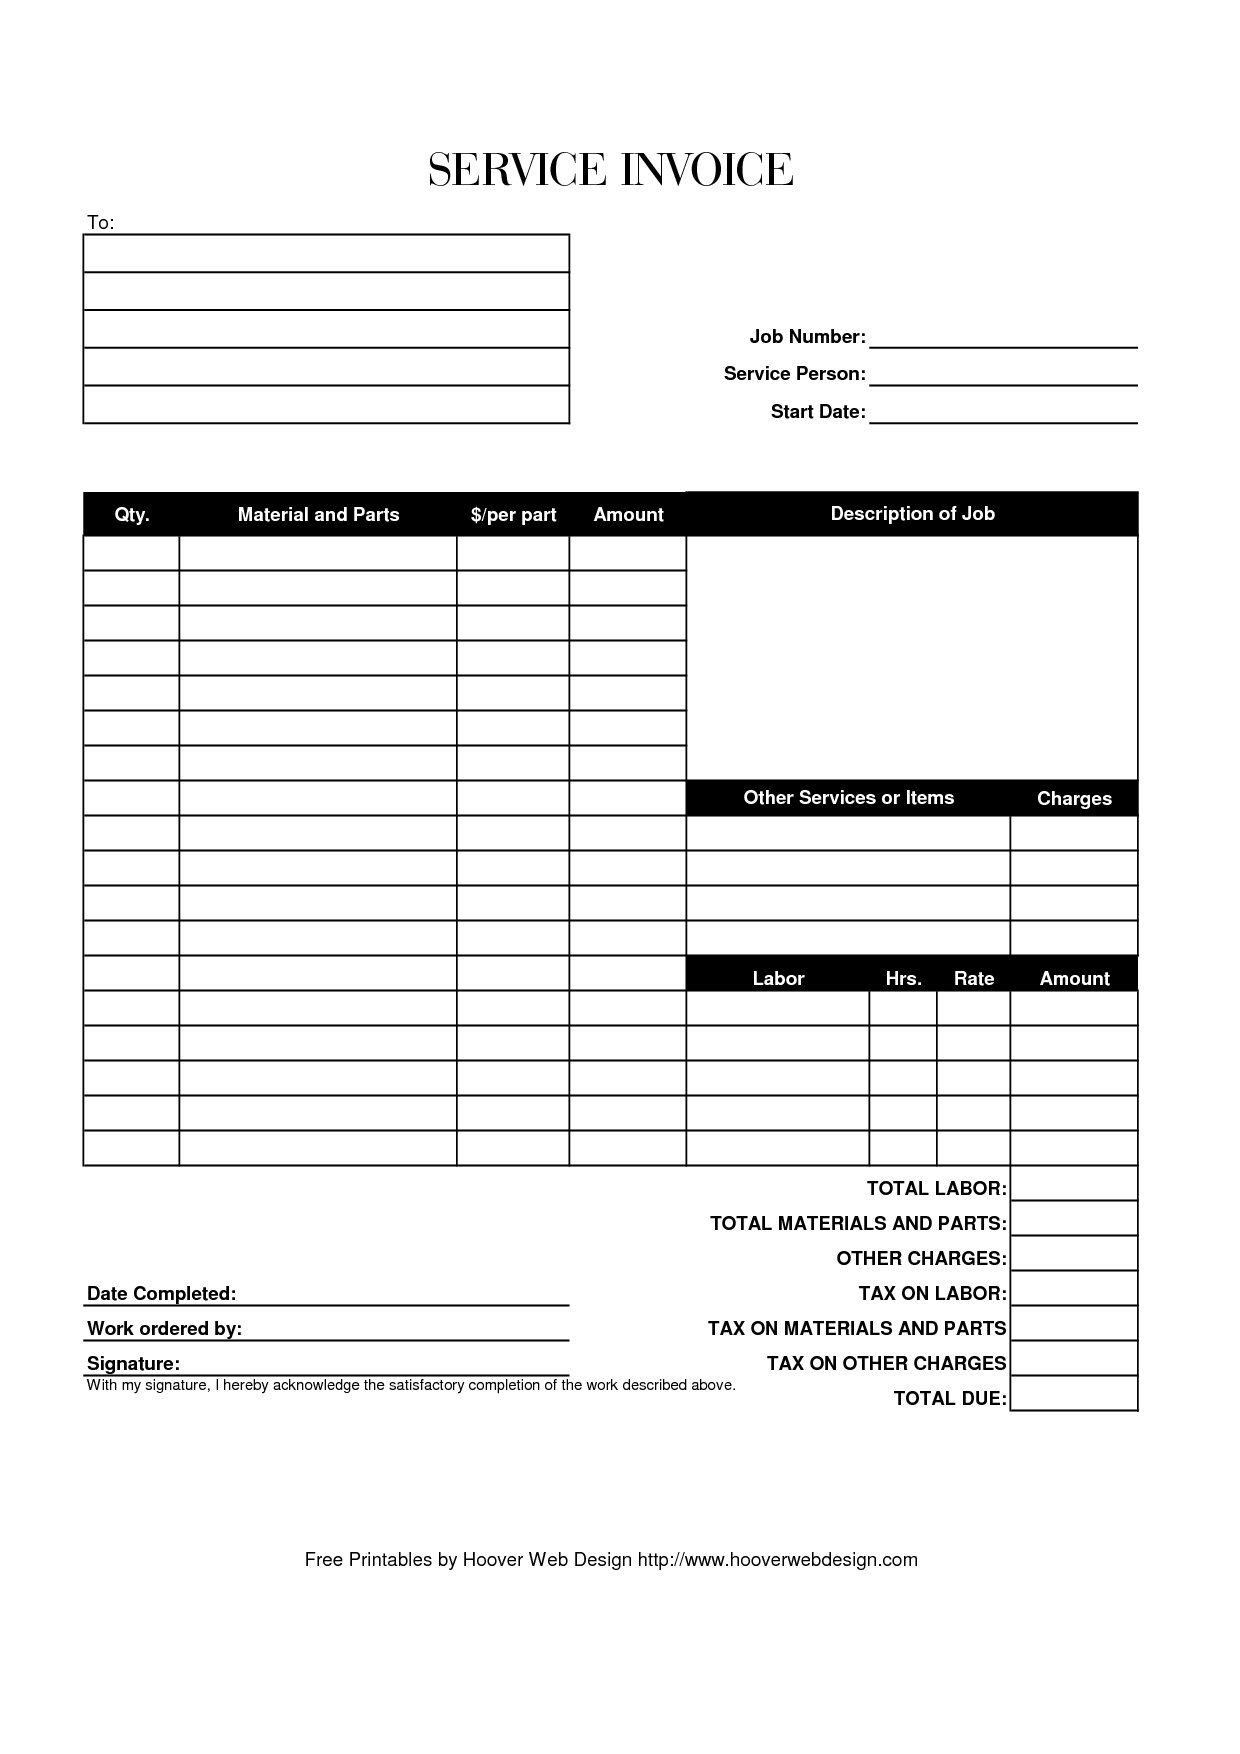 Hoover Receipts | Free Printable Service Invoice Template - Pdf - Free Printable Blank Invoice